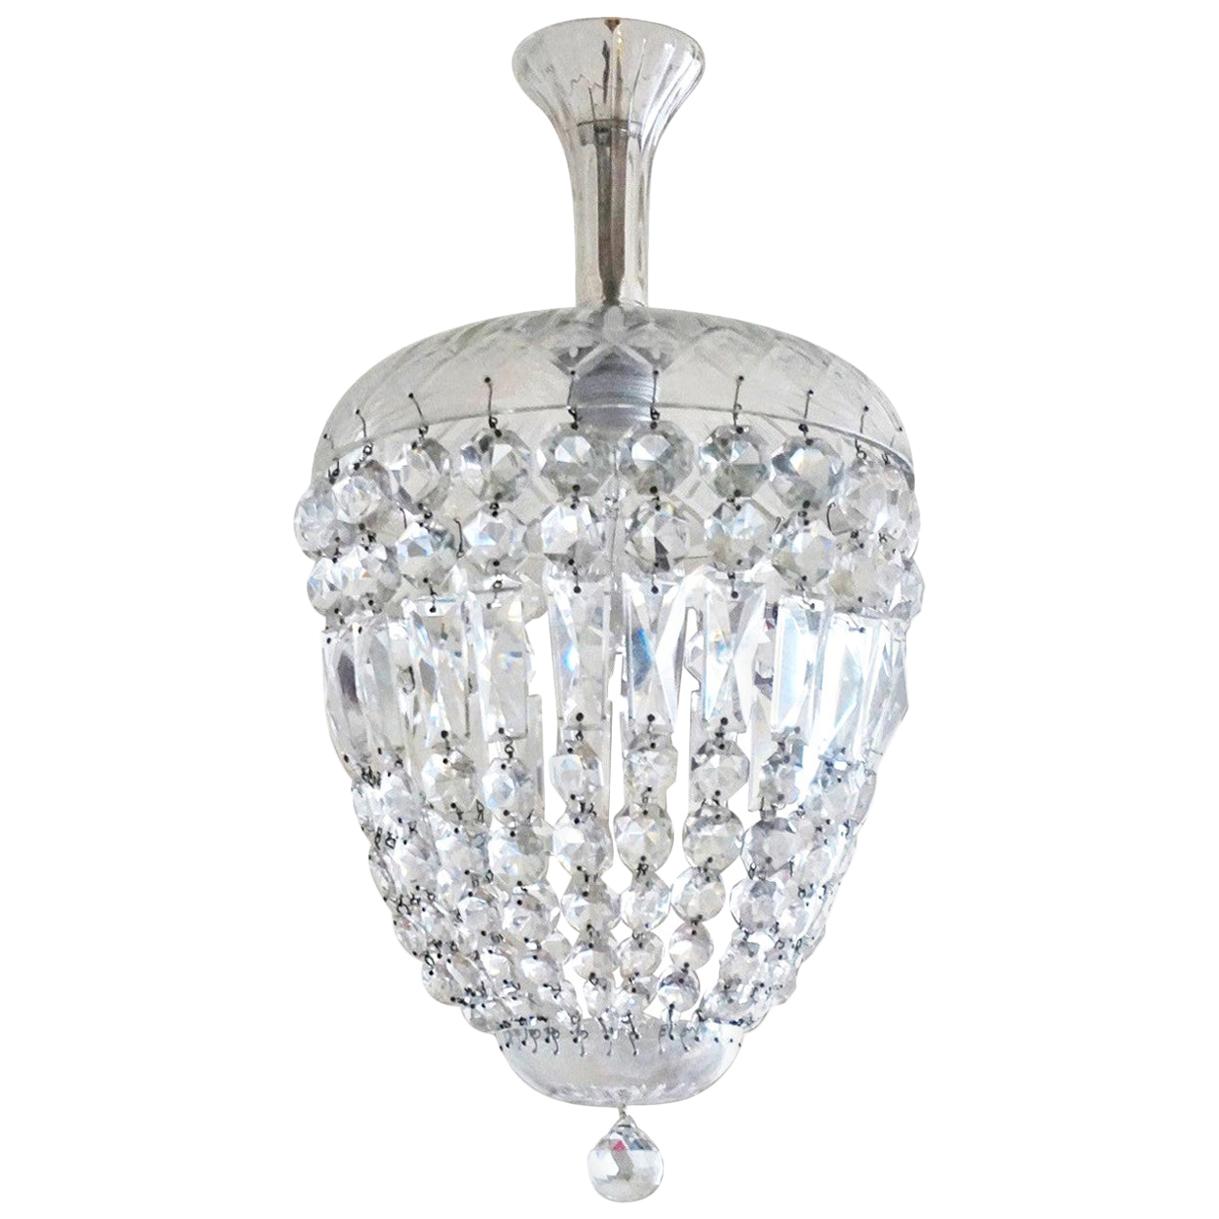 A beautiful French cut crystal lantern surrounded by faceted crystals, brass mounts, France, 1920-1929.
One brass and porlain E27 light socket for a large sized bulb 60 - 100Watt, rewired and ready to hang.
Measures:
Overall height 35.50